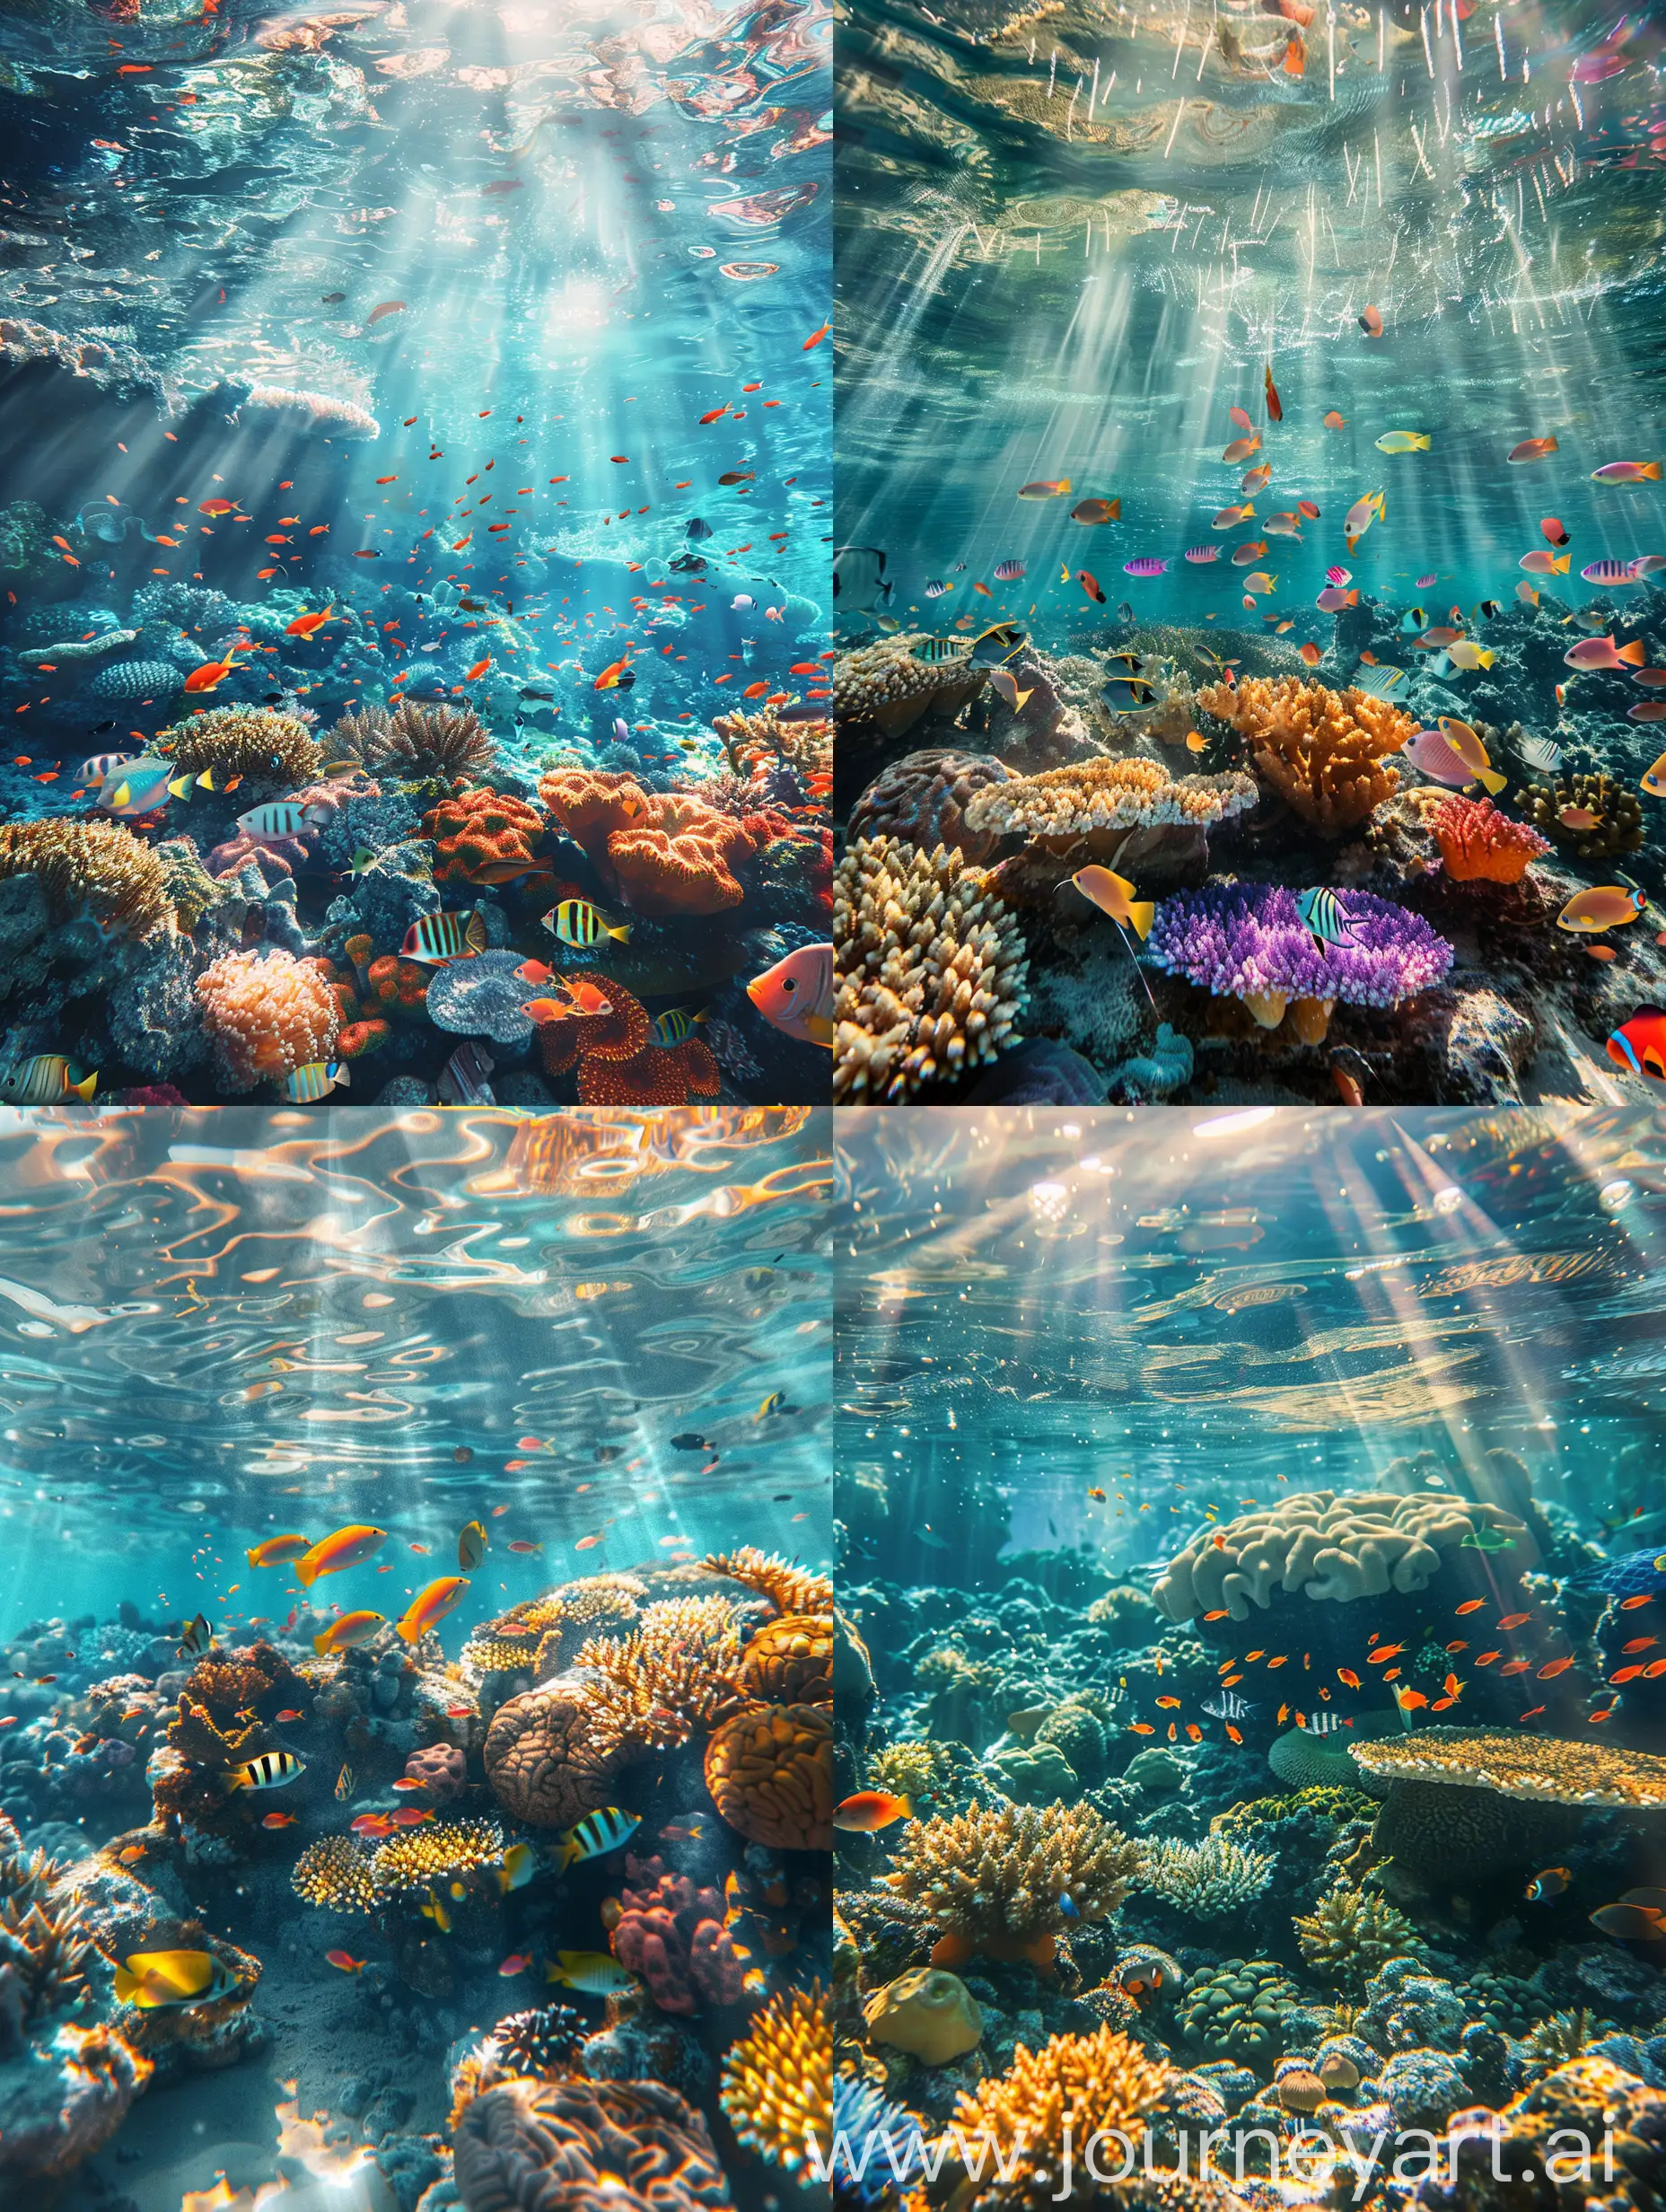 Realistic underwater scene of a vibrant coral reef teeming with colorful fish. Sunlight filters through the clear water, casting dappled light on the reef, creating a peaceful and serene atmosphere. High resolution for phone wallpaper aspect ratio- 9:16